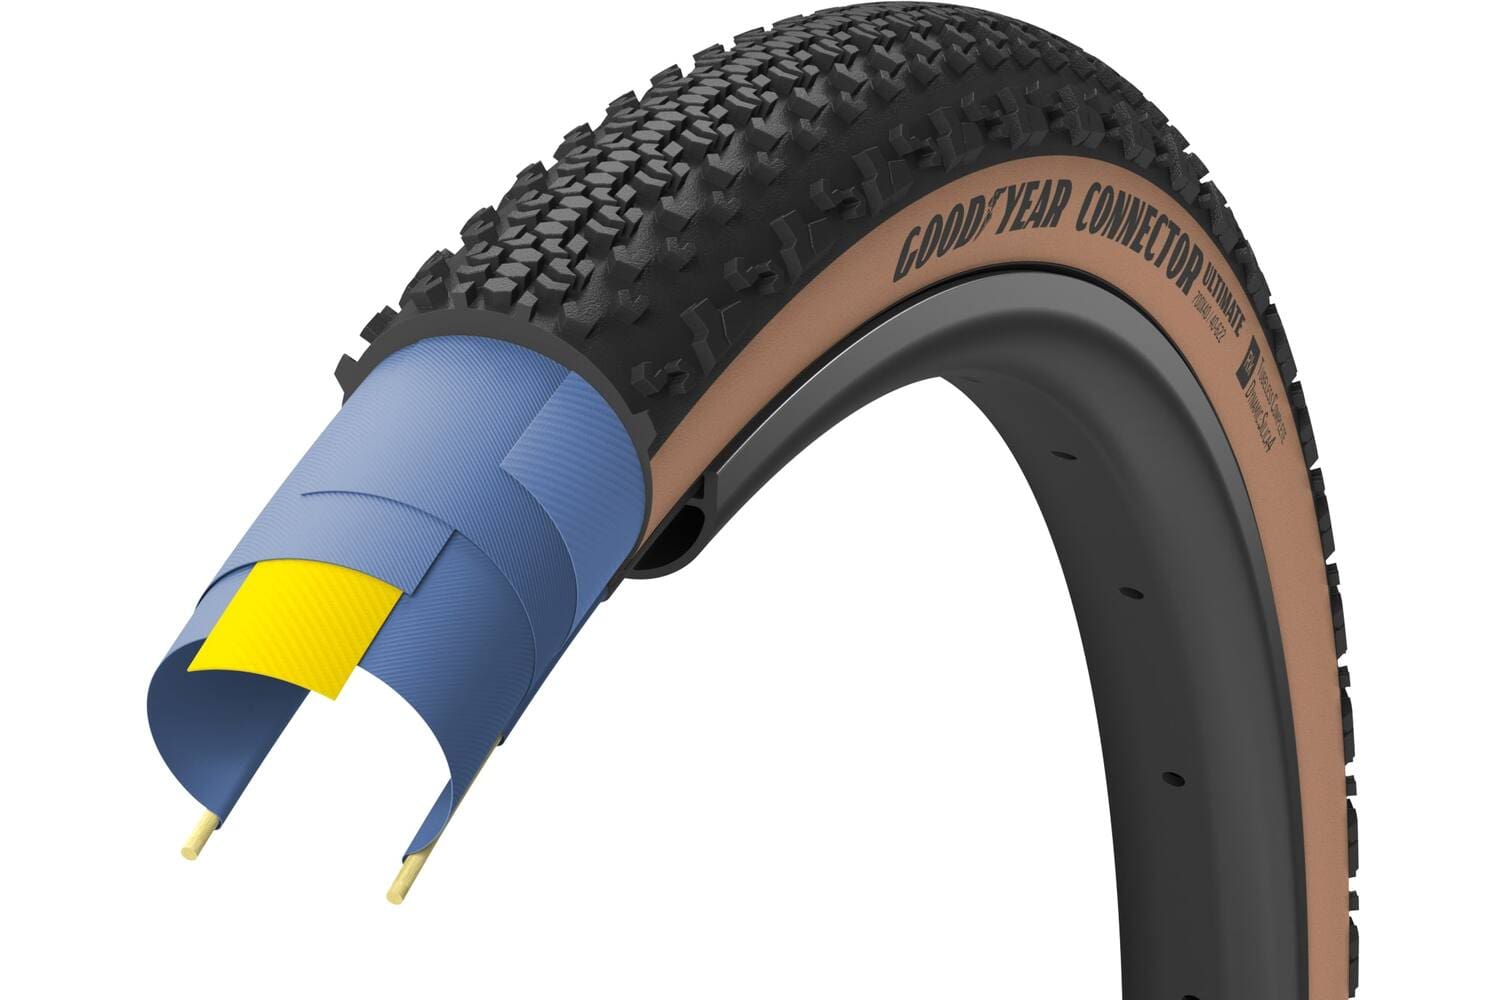 Goodyear CONNECTOR ULTIMATE TUBELESS / 700X40C SKINWALL